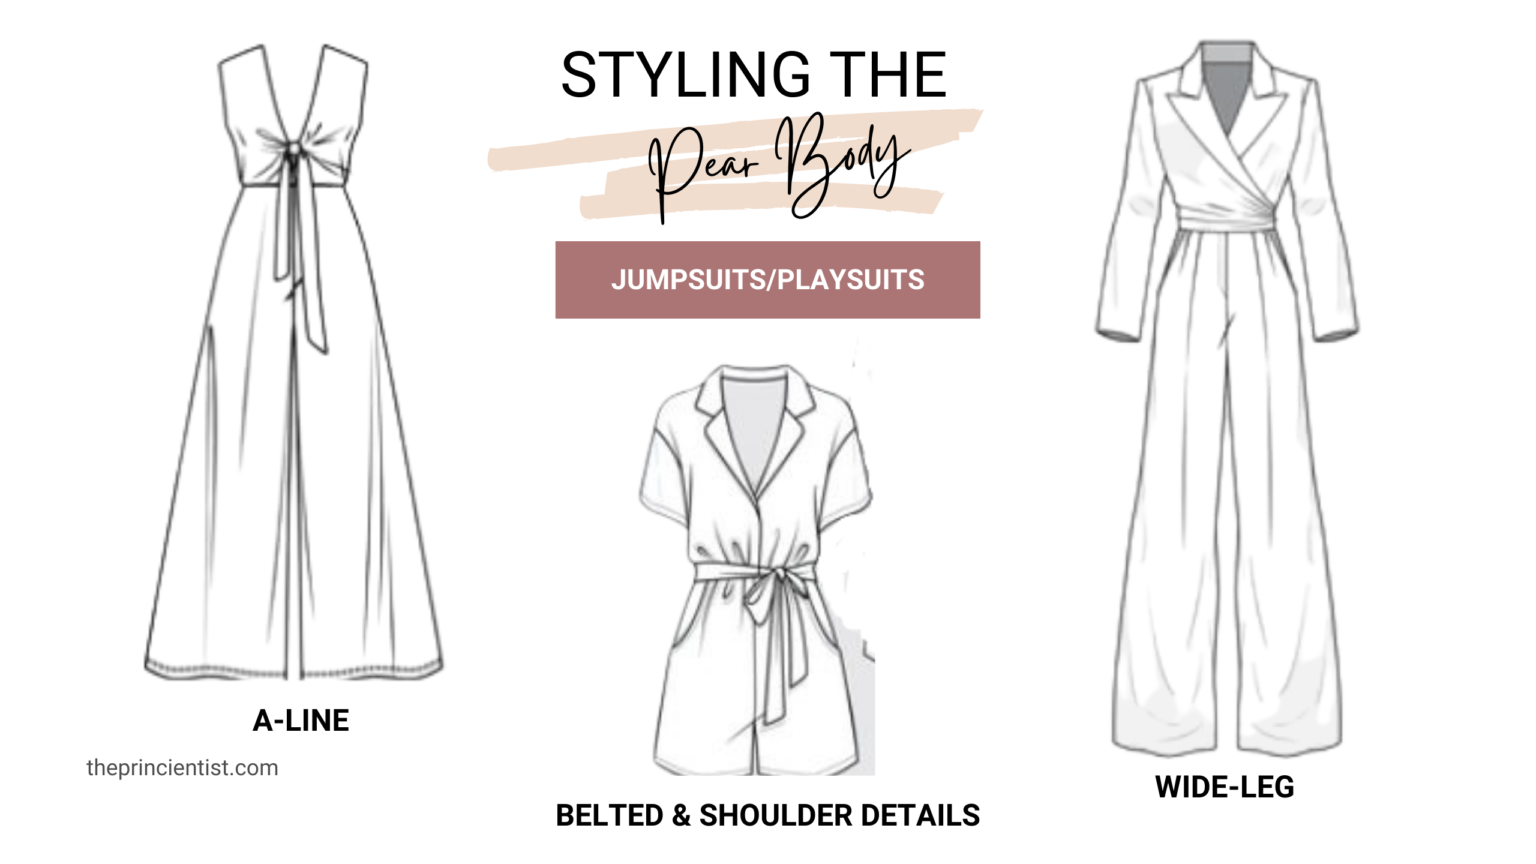 how to dress the pear shaped body - jumpsuits/playsuits for the pear body